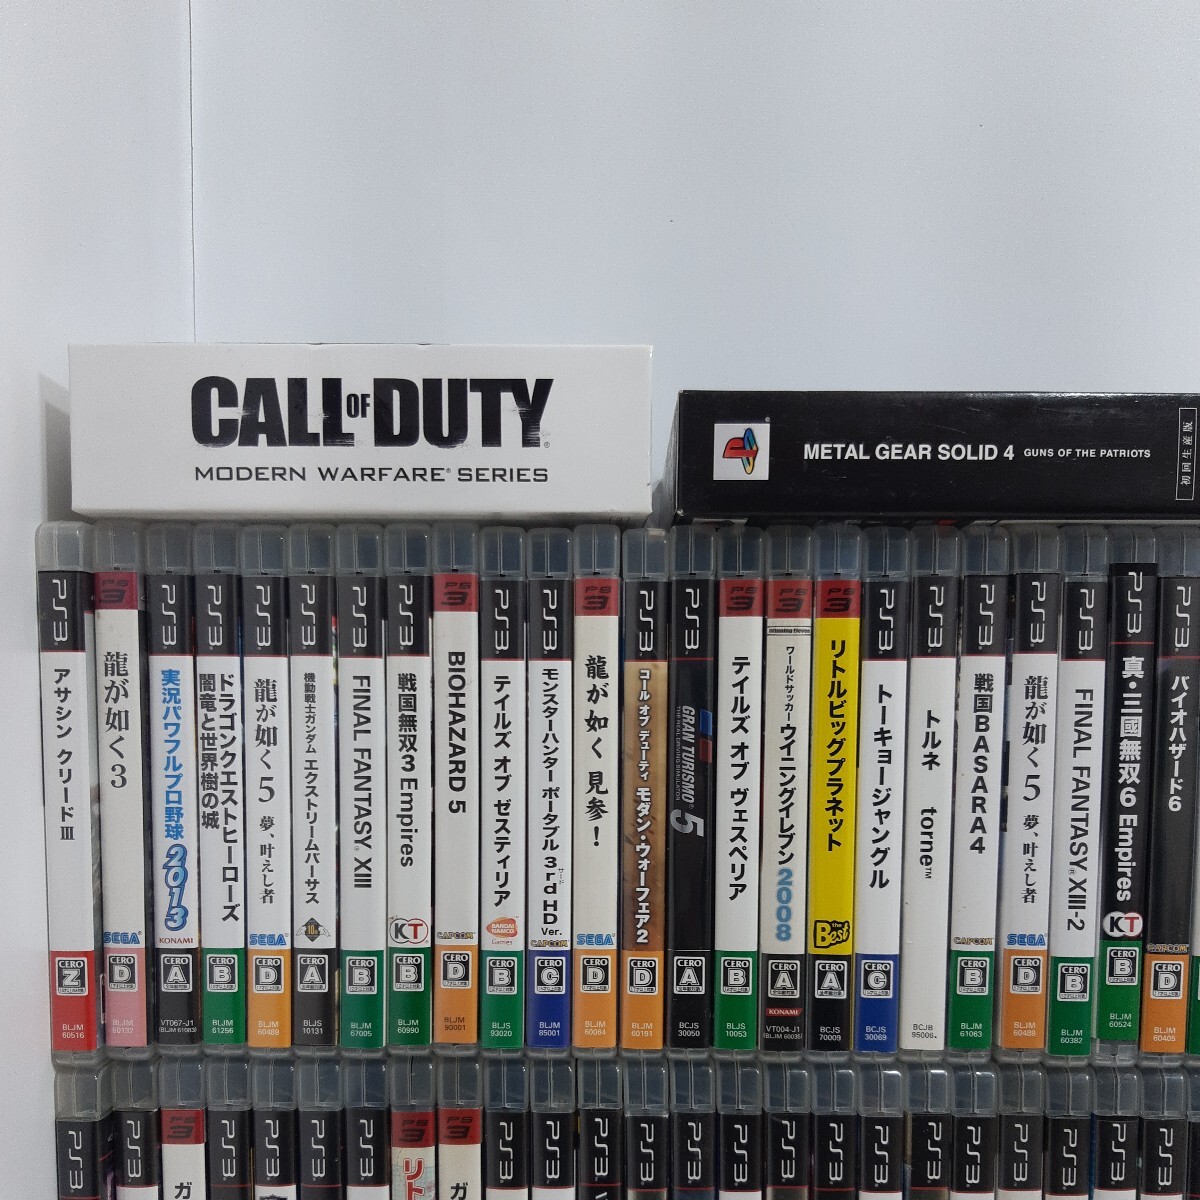 23 PS3 game soft [ Junk ] * summarize 1 jpy ~ PlayStation PlayStation 3 popular work 124ps.@ approximately 17,2. Call of Duty / dark sole / other 